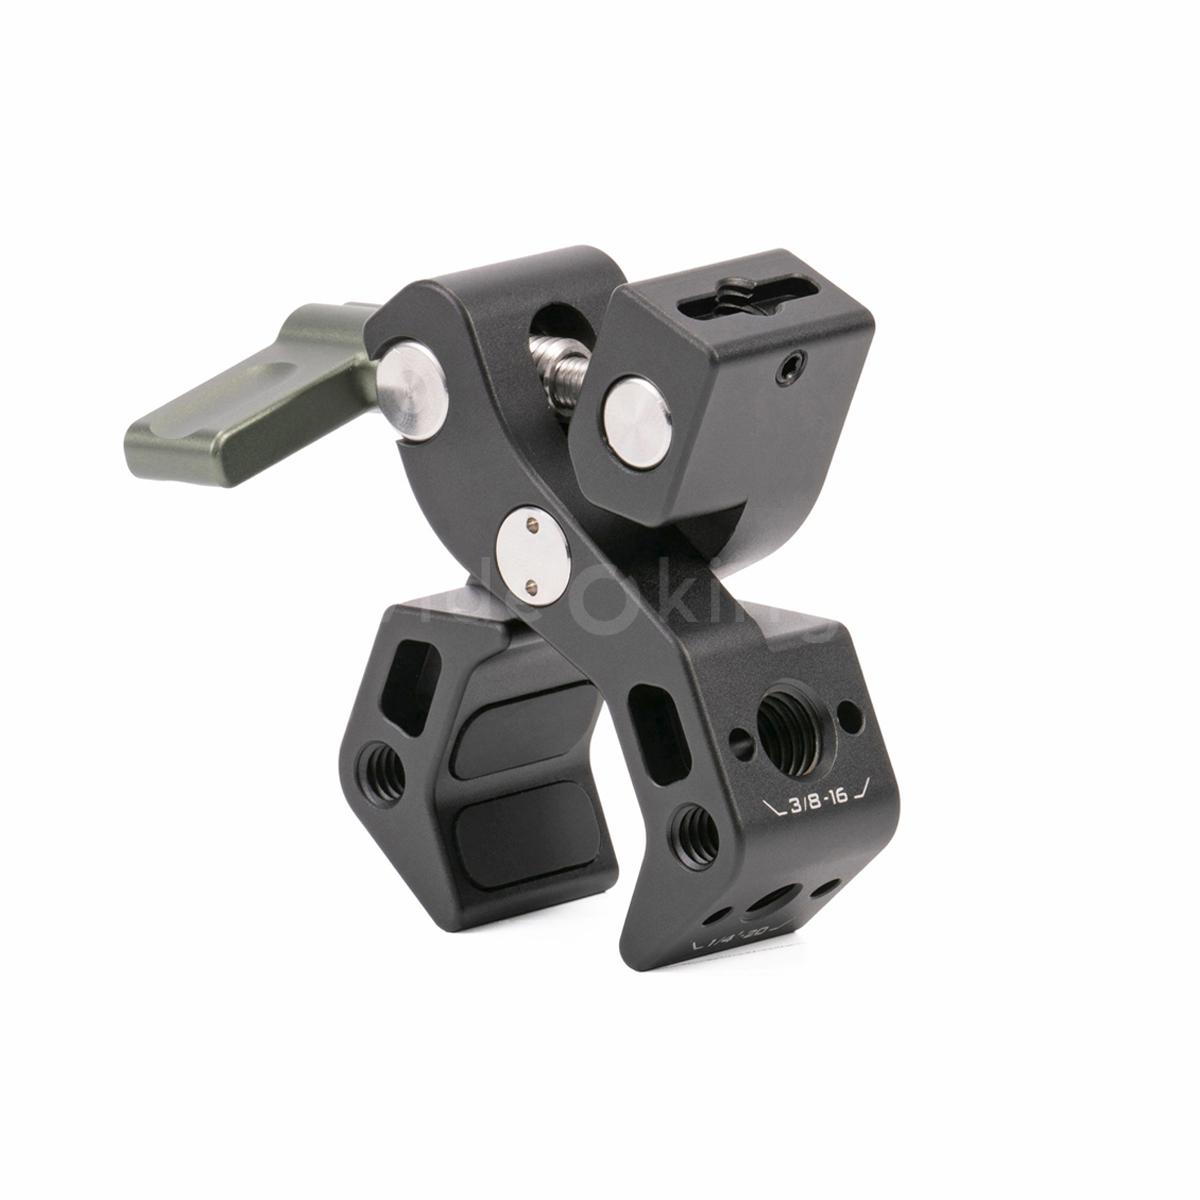 Tilta Accessory Mounting Clamp – Black